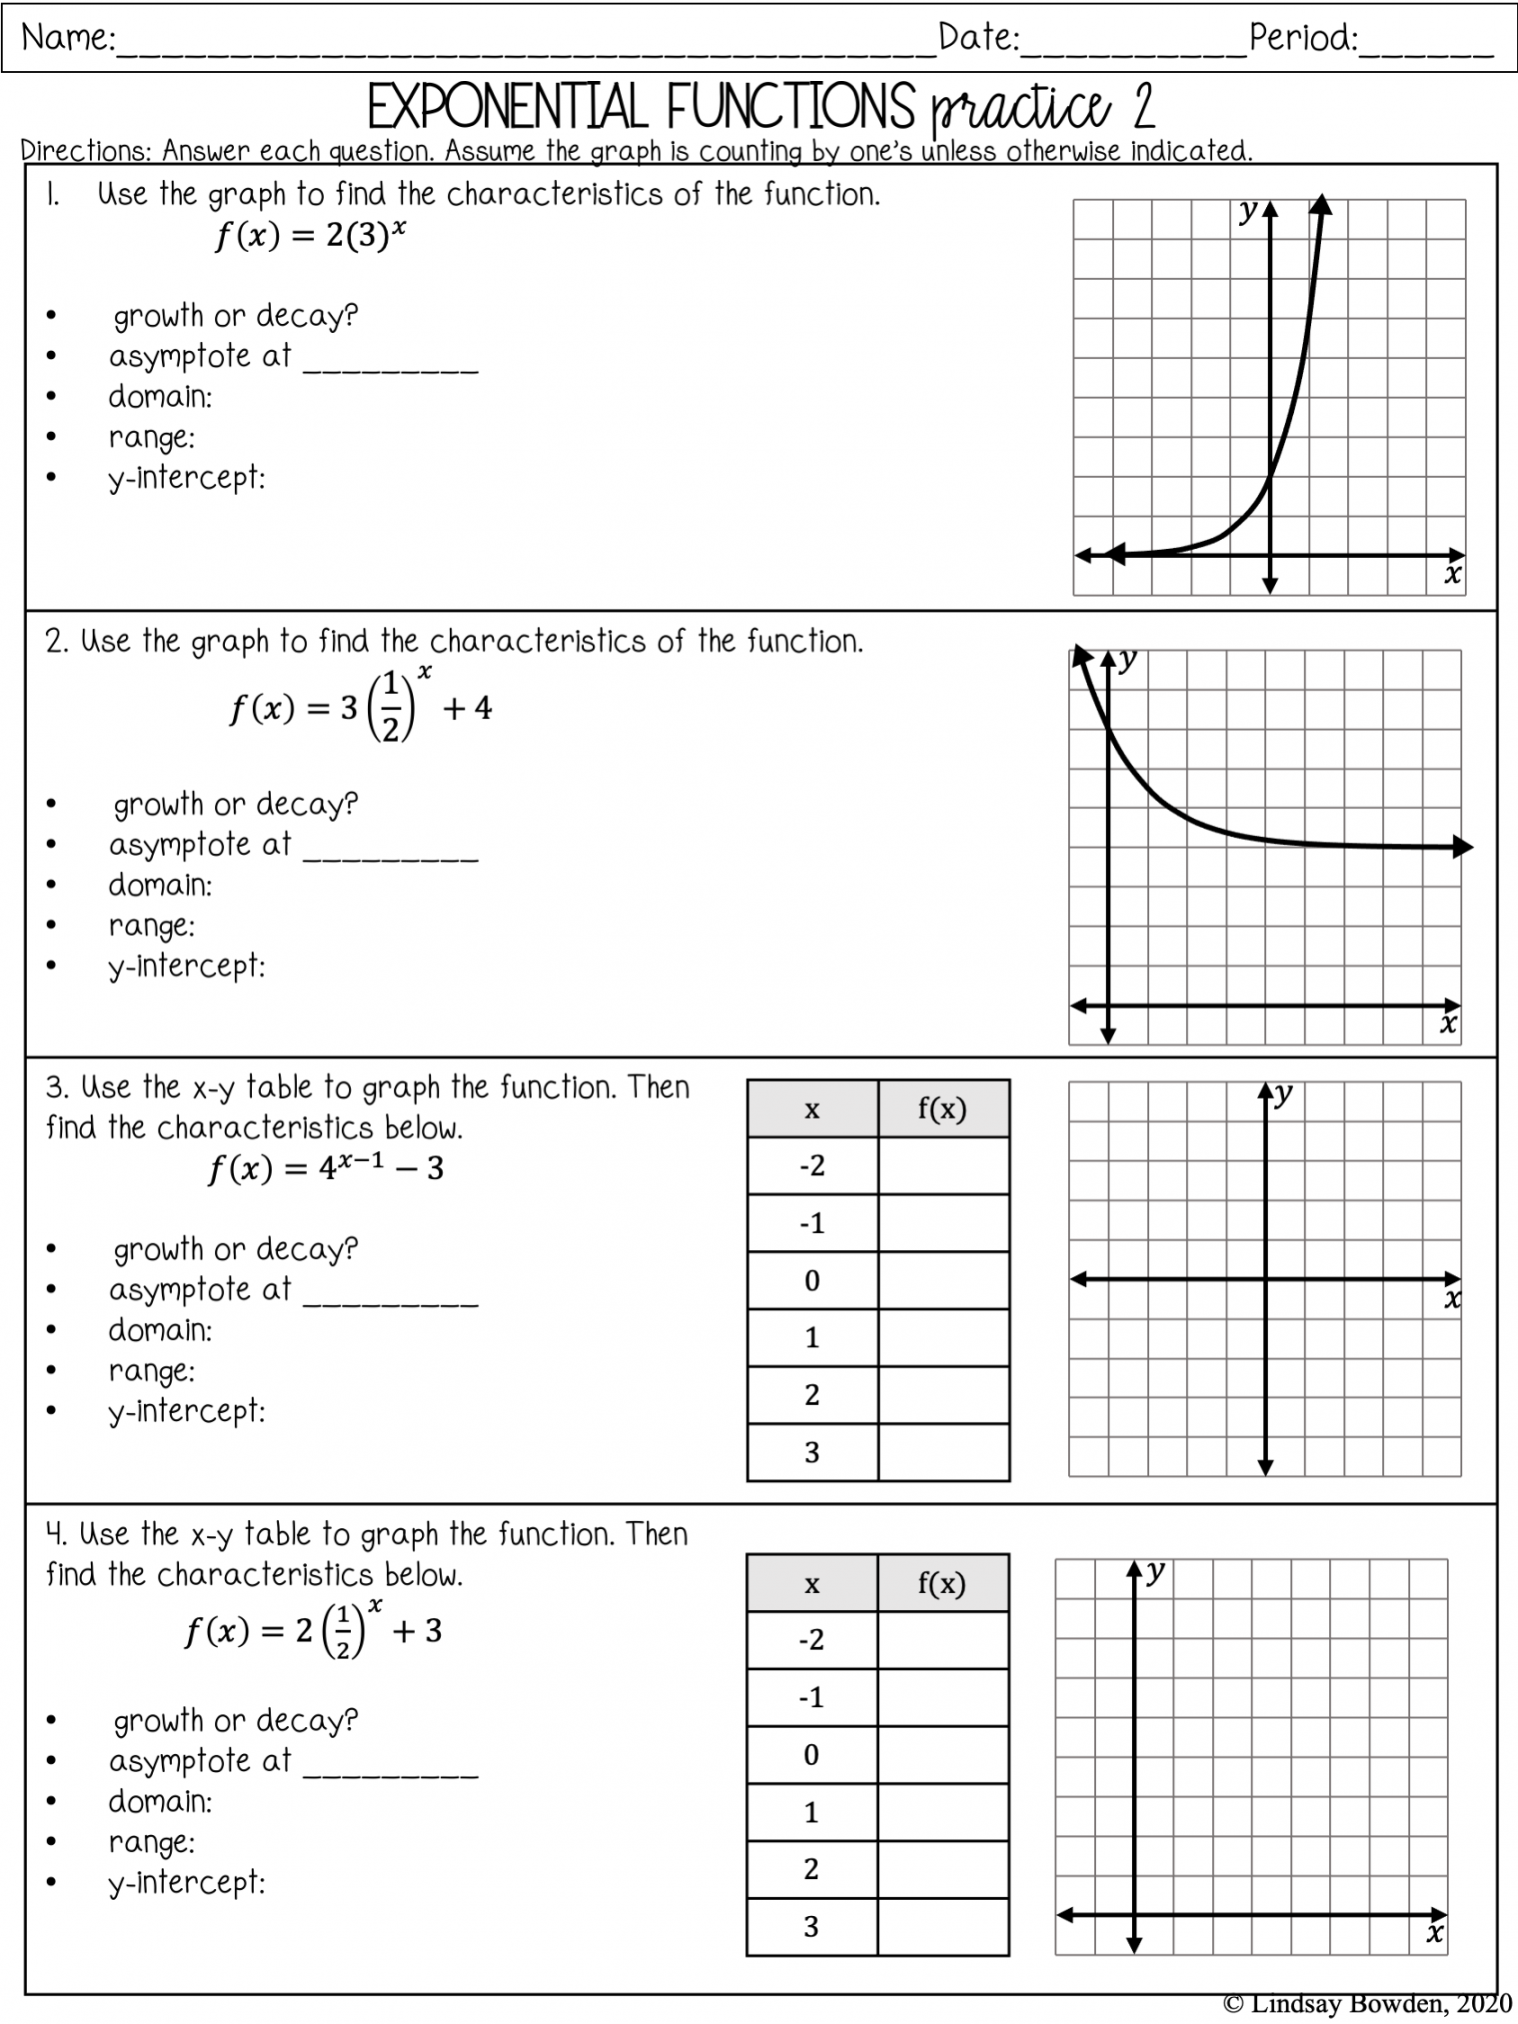 Exponential Functions Notes and Worksheets - Lindsay Bowden